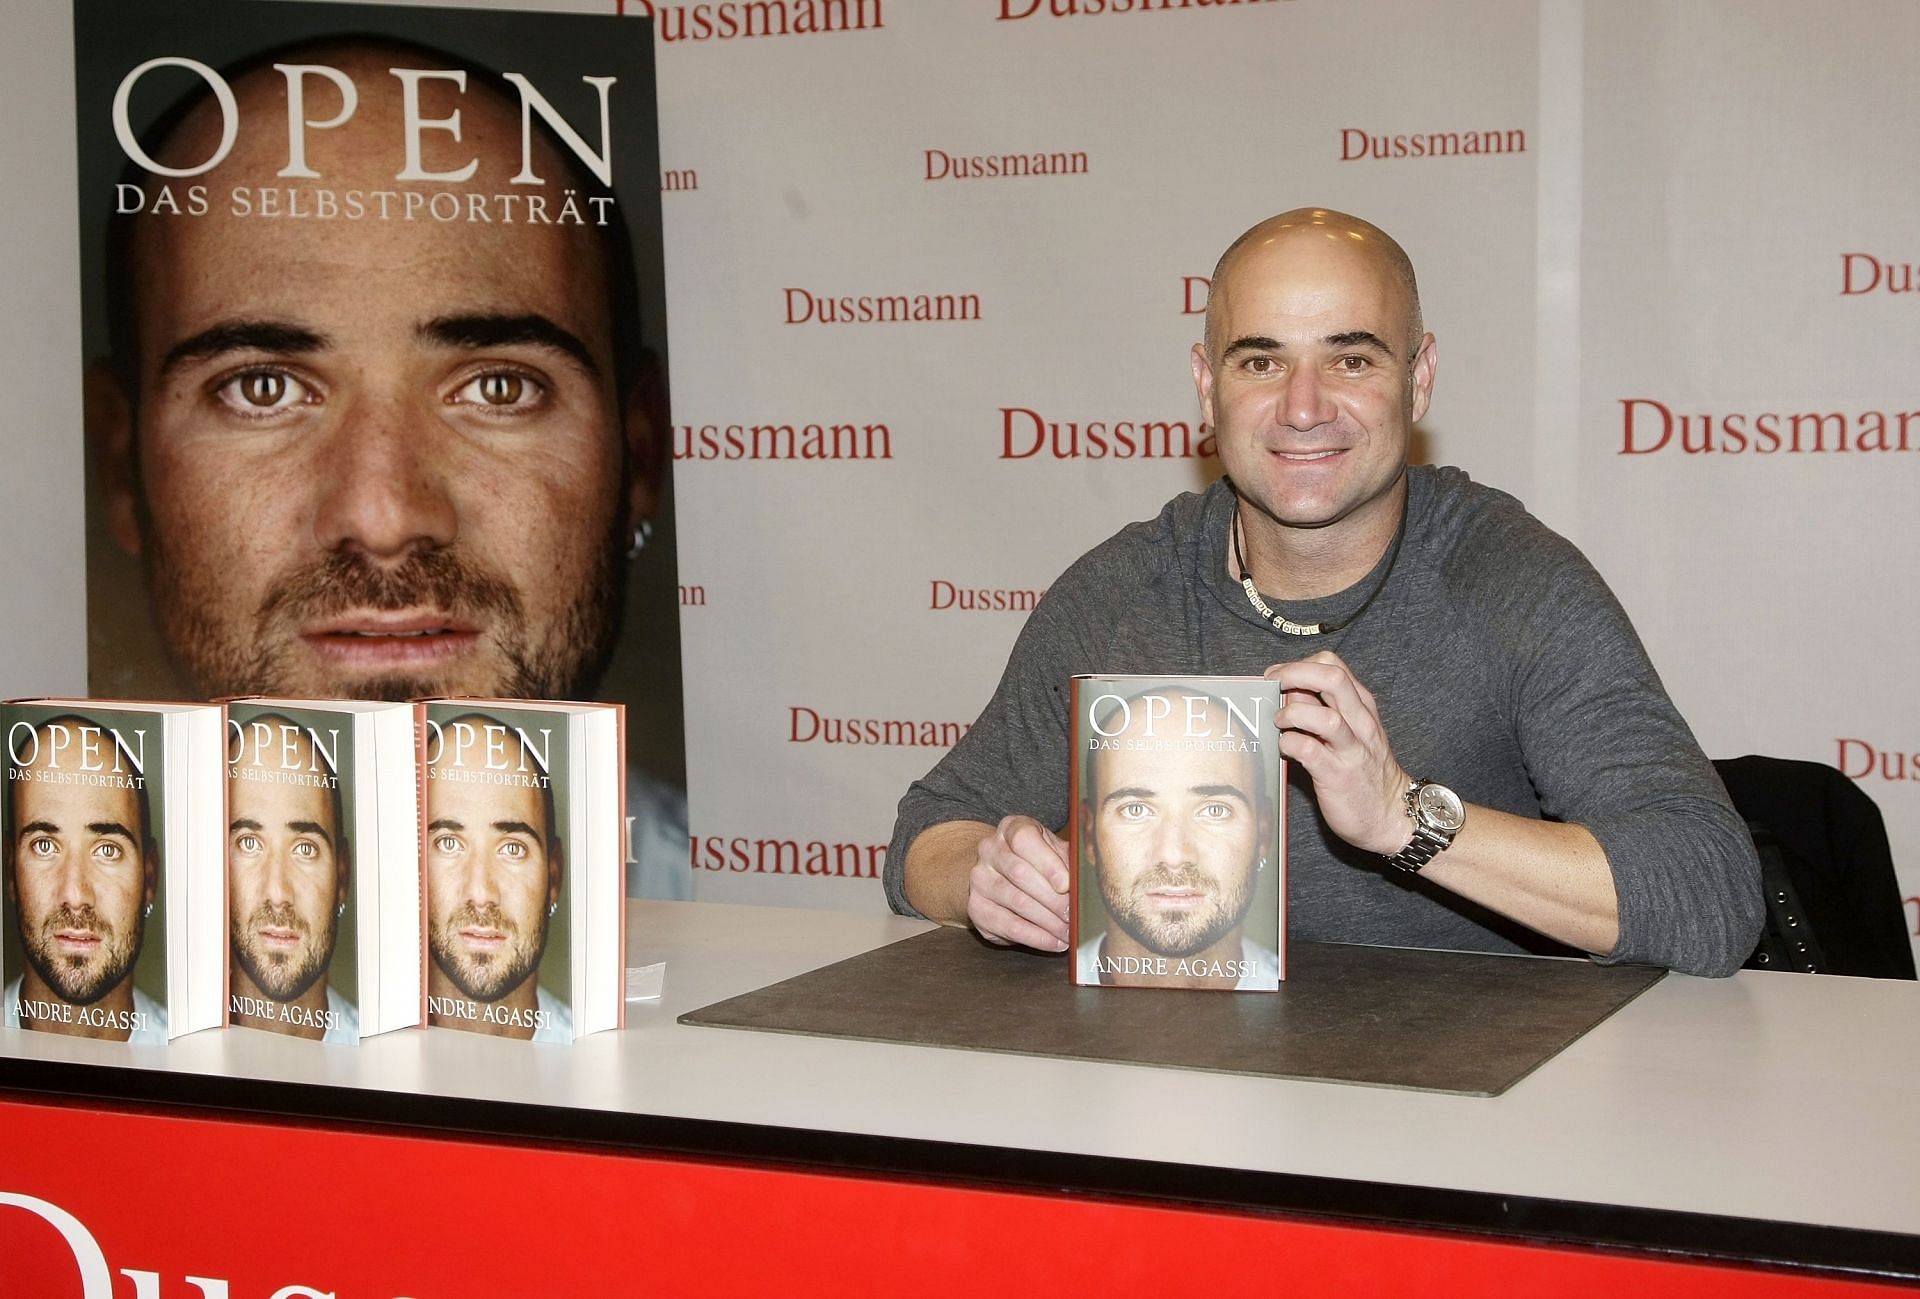 Andre Agassi at the signing of his book &#039;Open&#039; in 2009